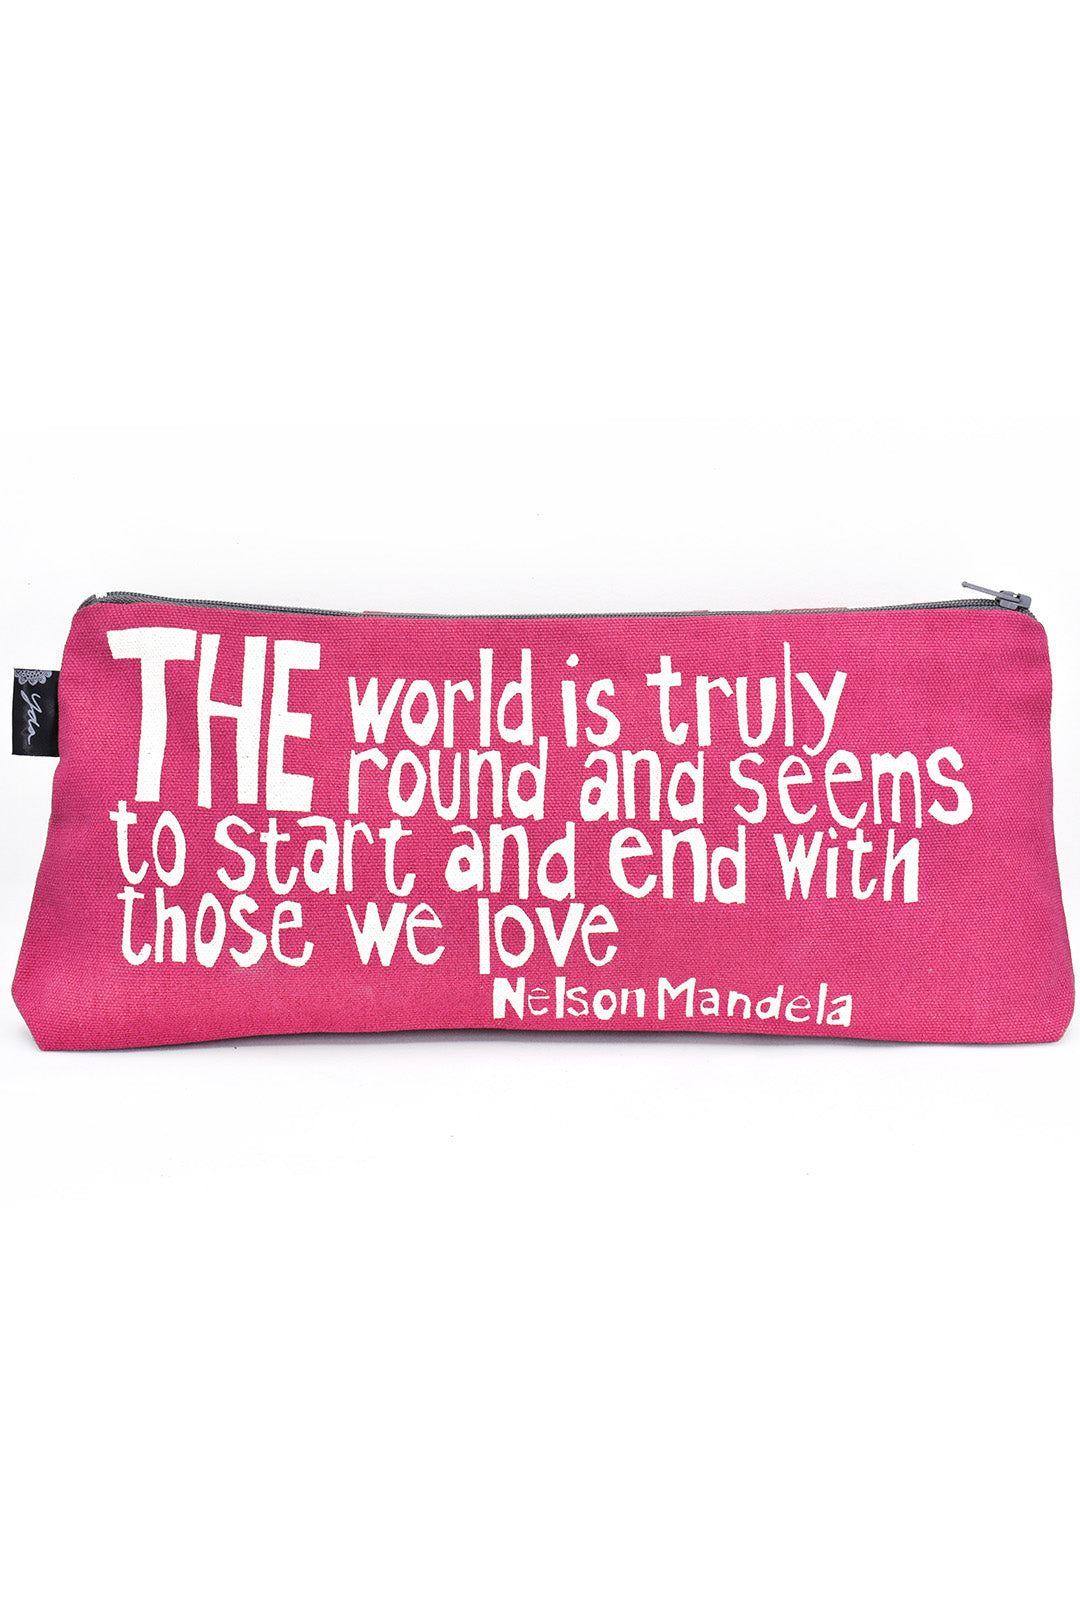 Pink "Those We Love" Nelson Mandela Quote Pouch